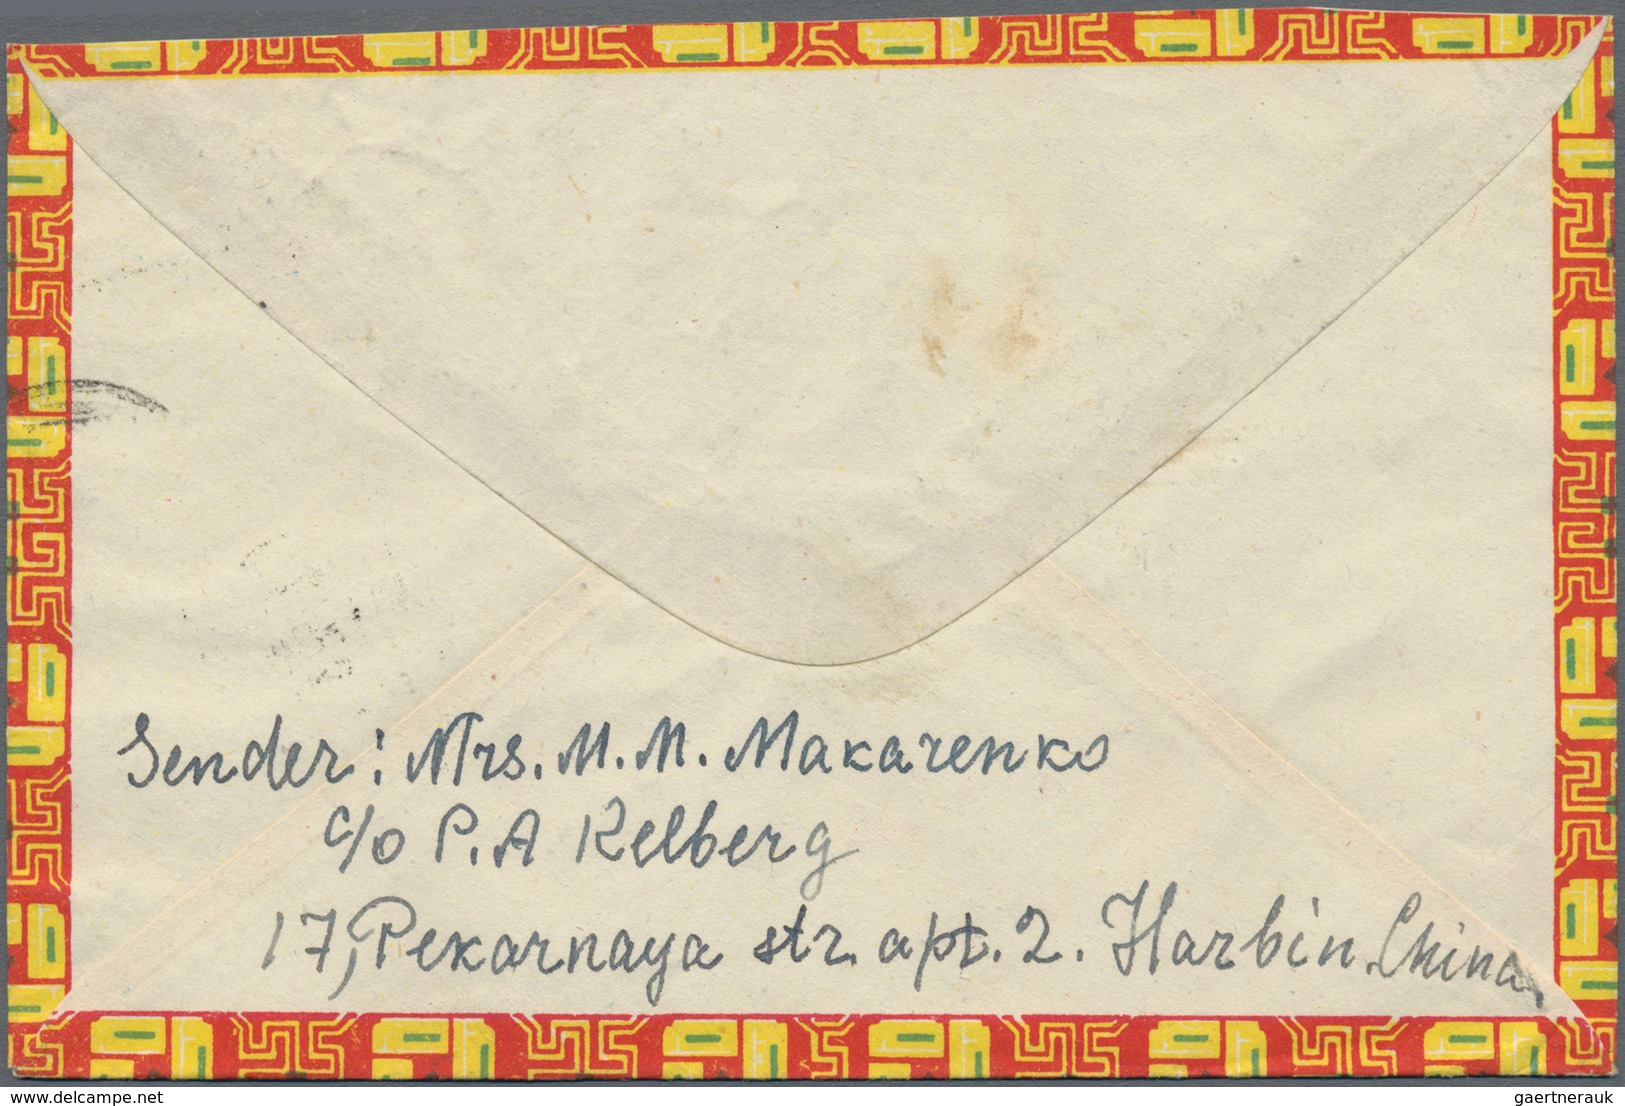 China - Volksrepublik: 1953/60, illustrated covers used to Hong Kong (18, mostly surface) or to Russ